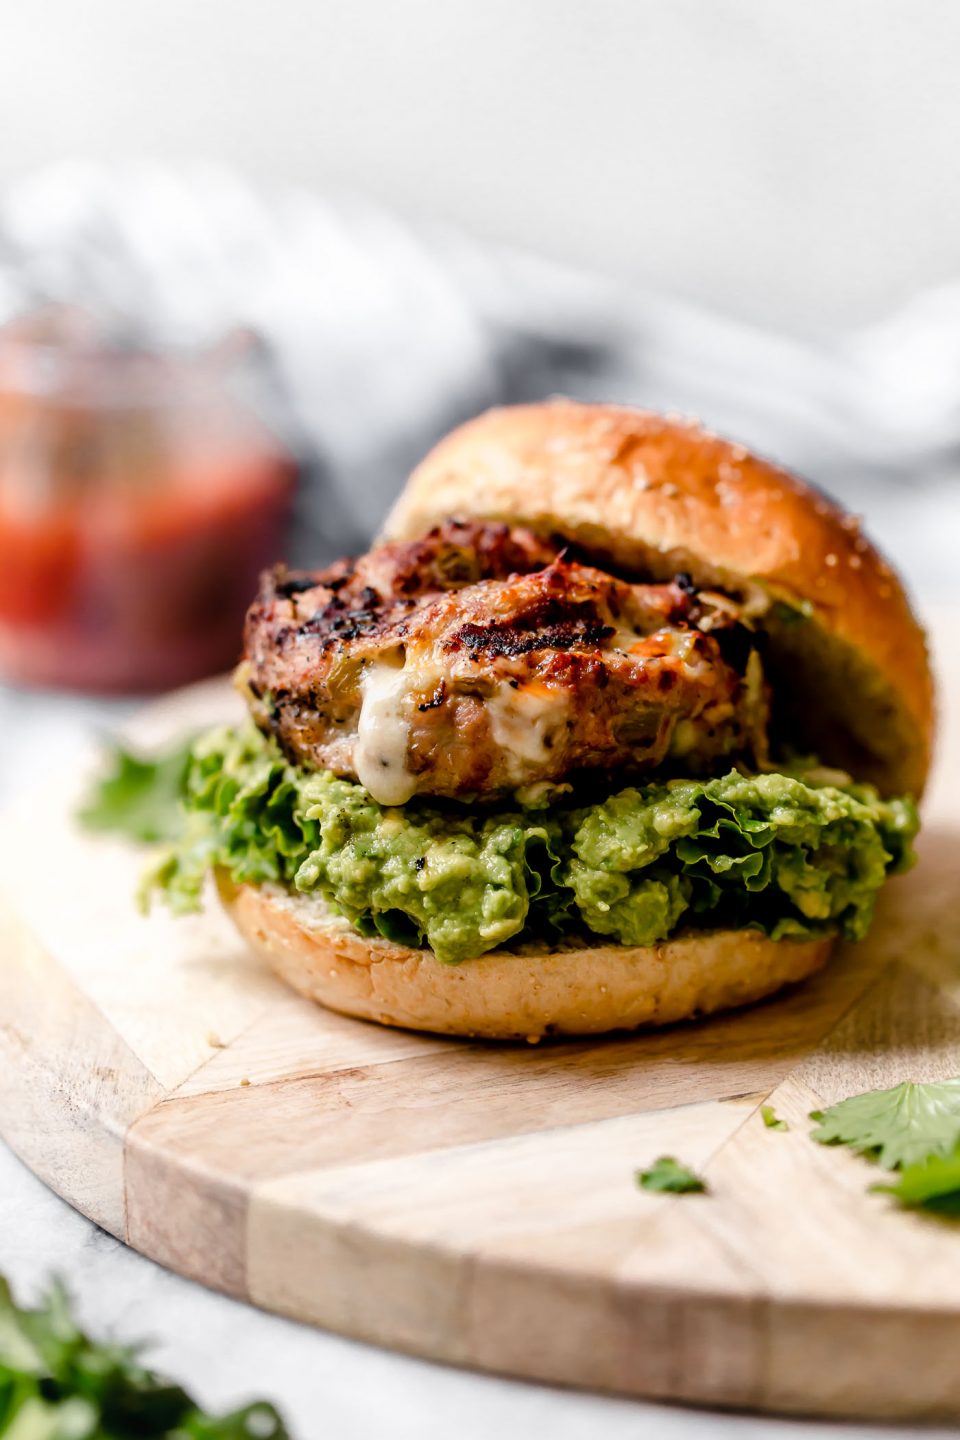 Stuffed Southwest Turkey Burger place on a burger bun with lettuce & guacamole. Burger is sitting on a light wood board, with a jar of salsa behind it.